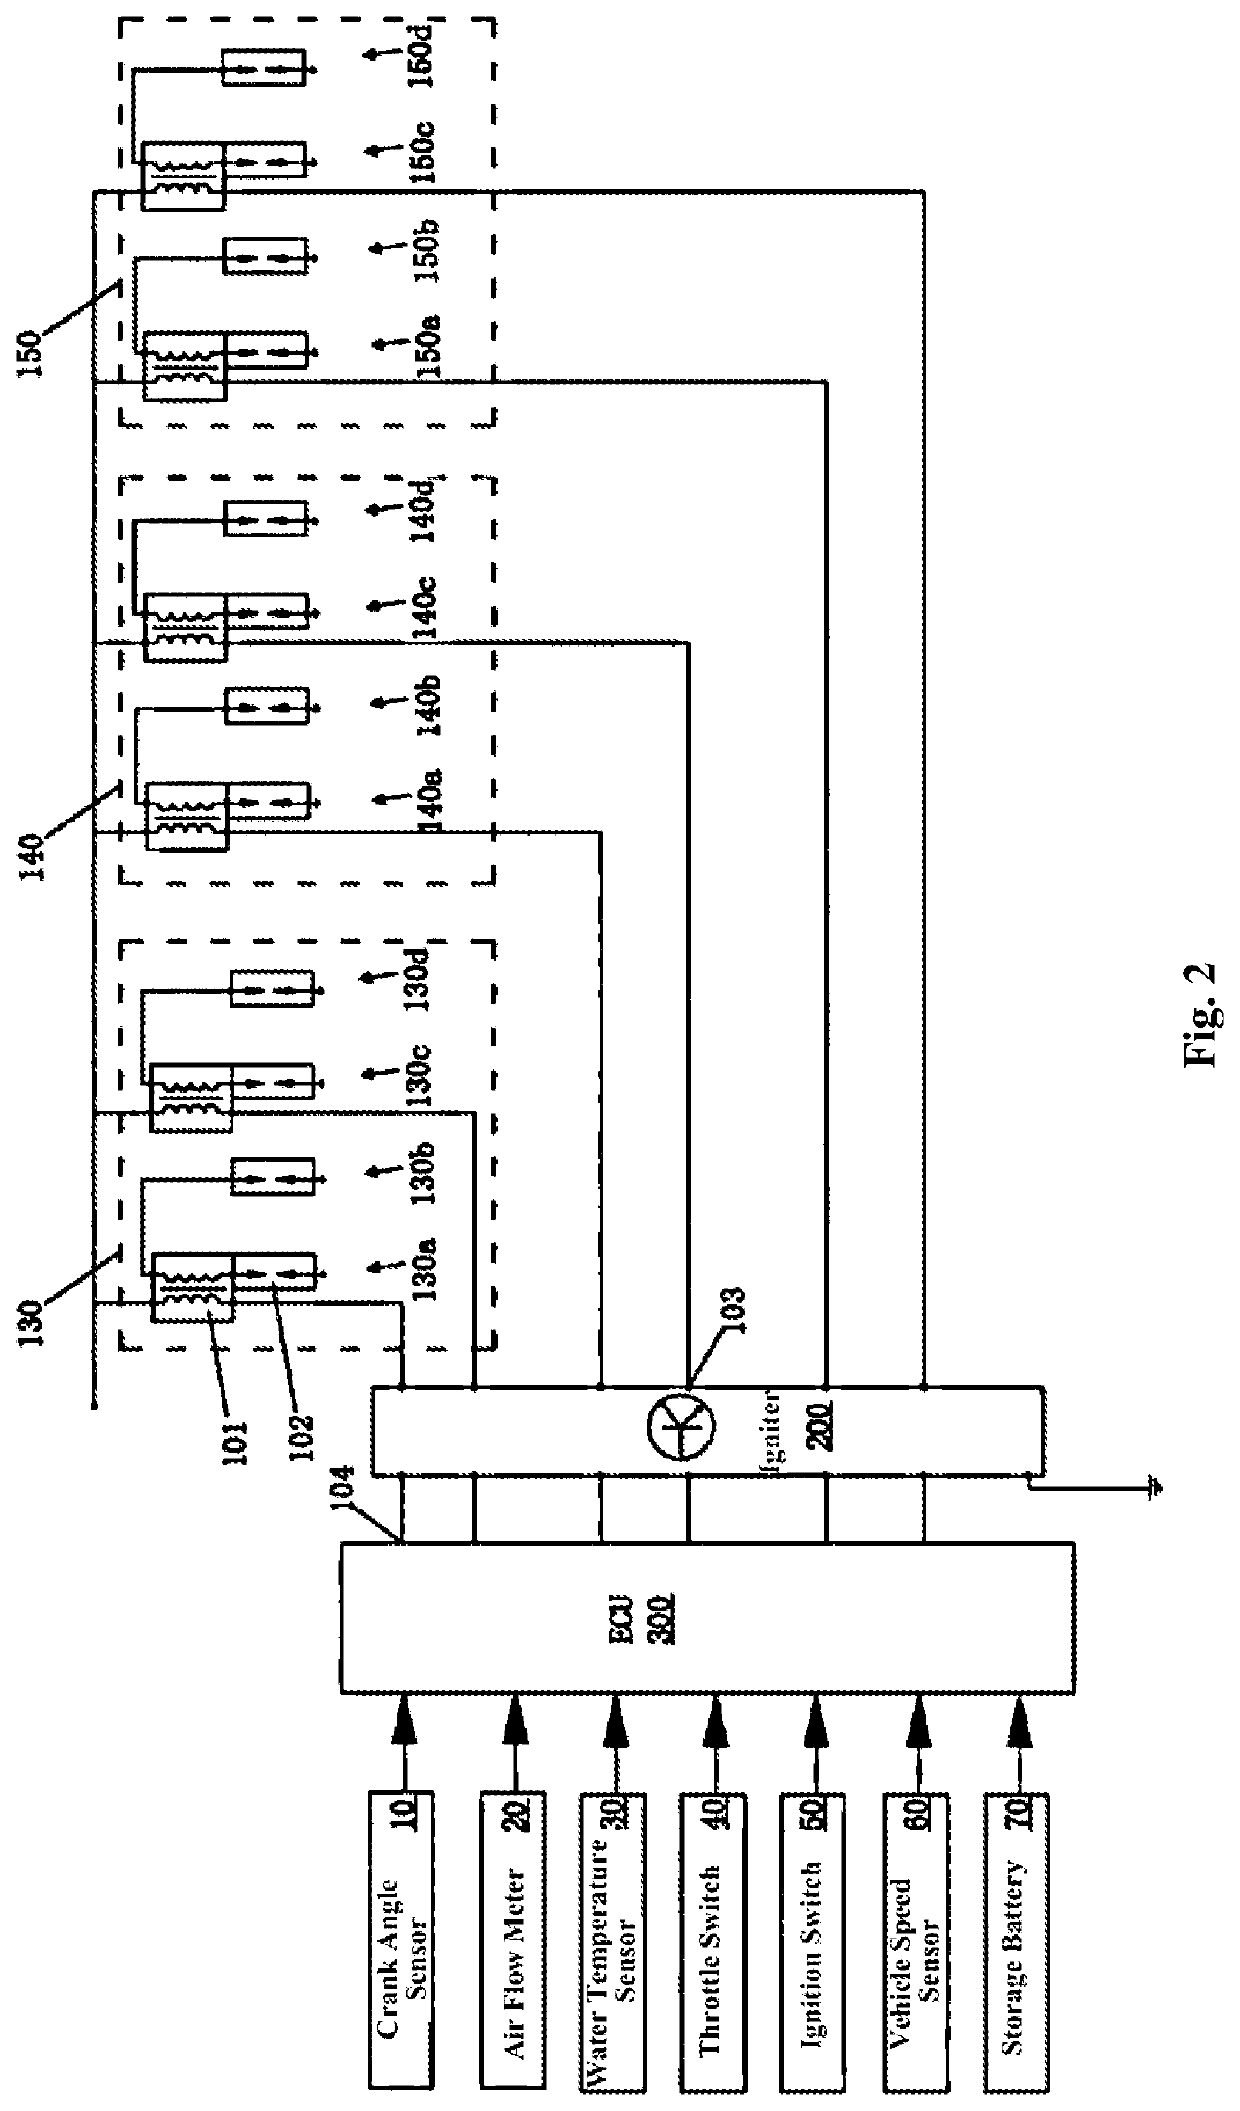 Ignition system for tandem-type hybrid vehicle